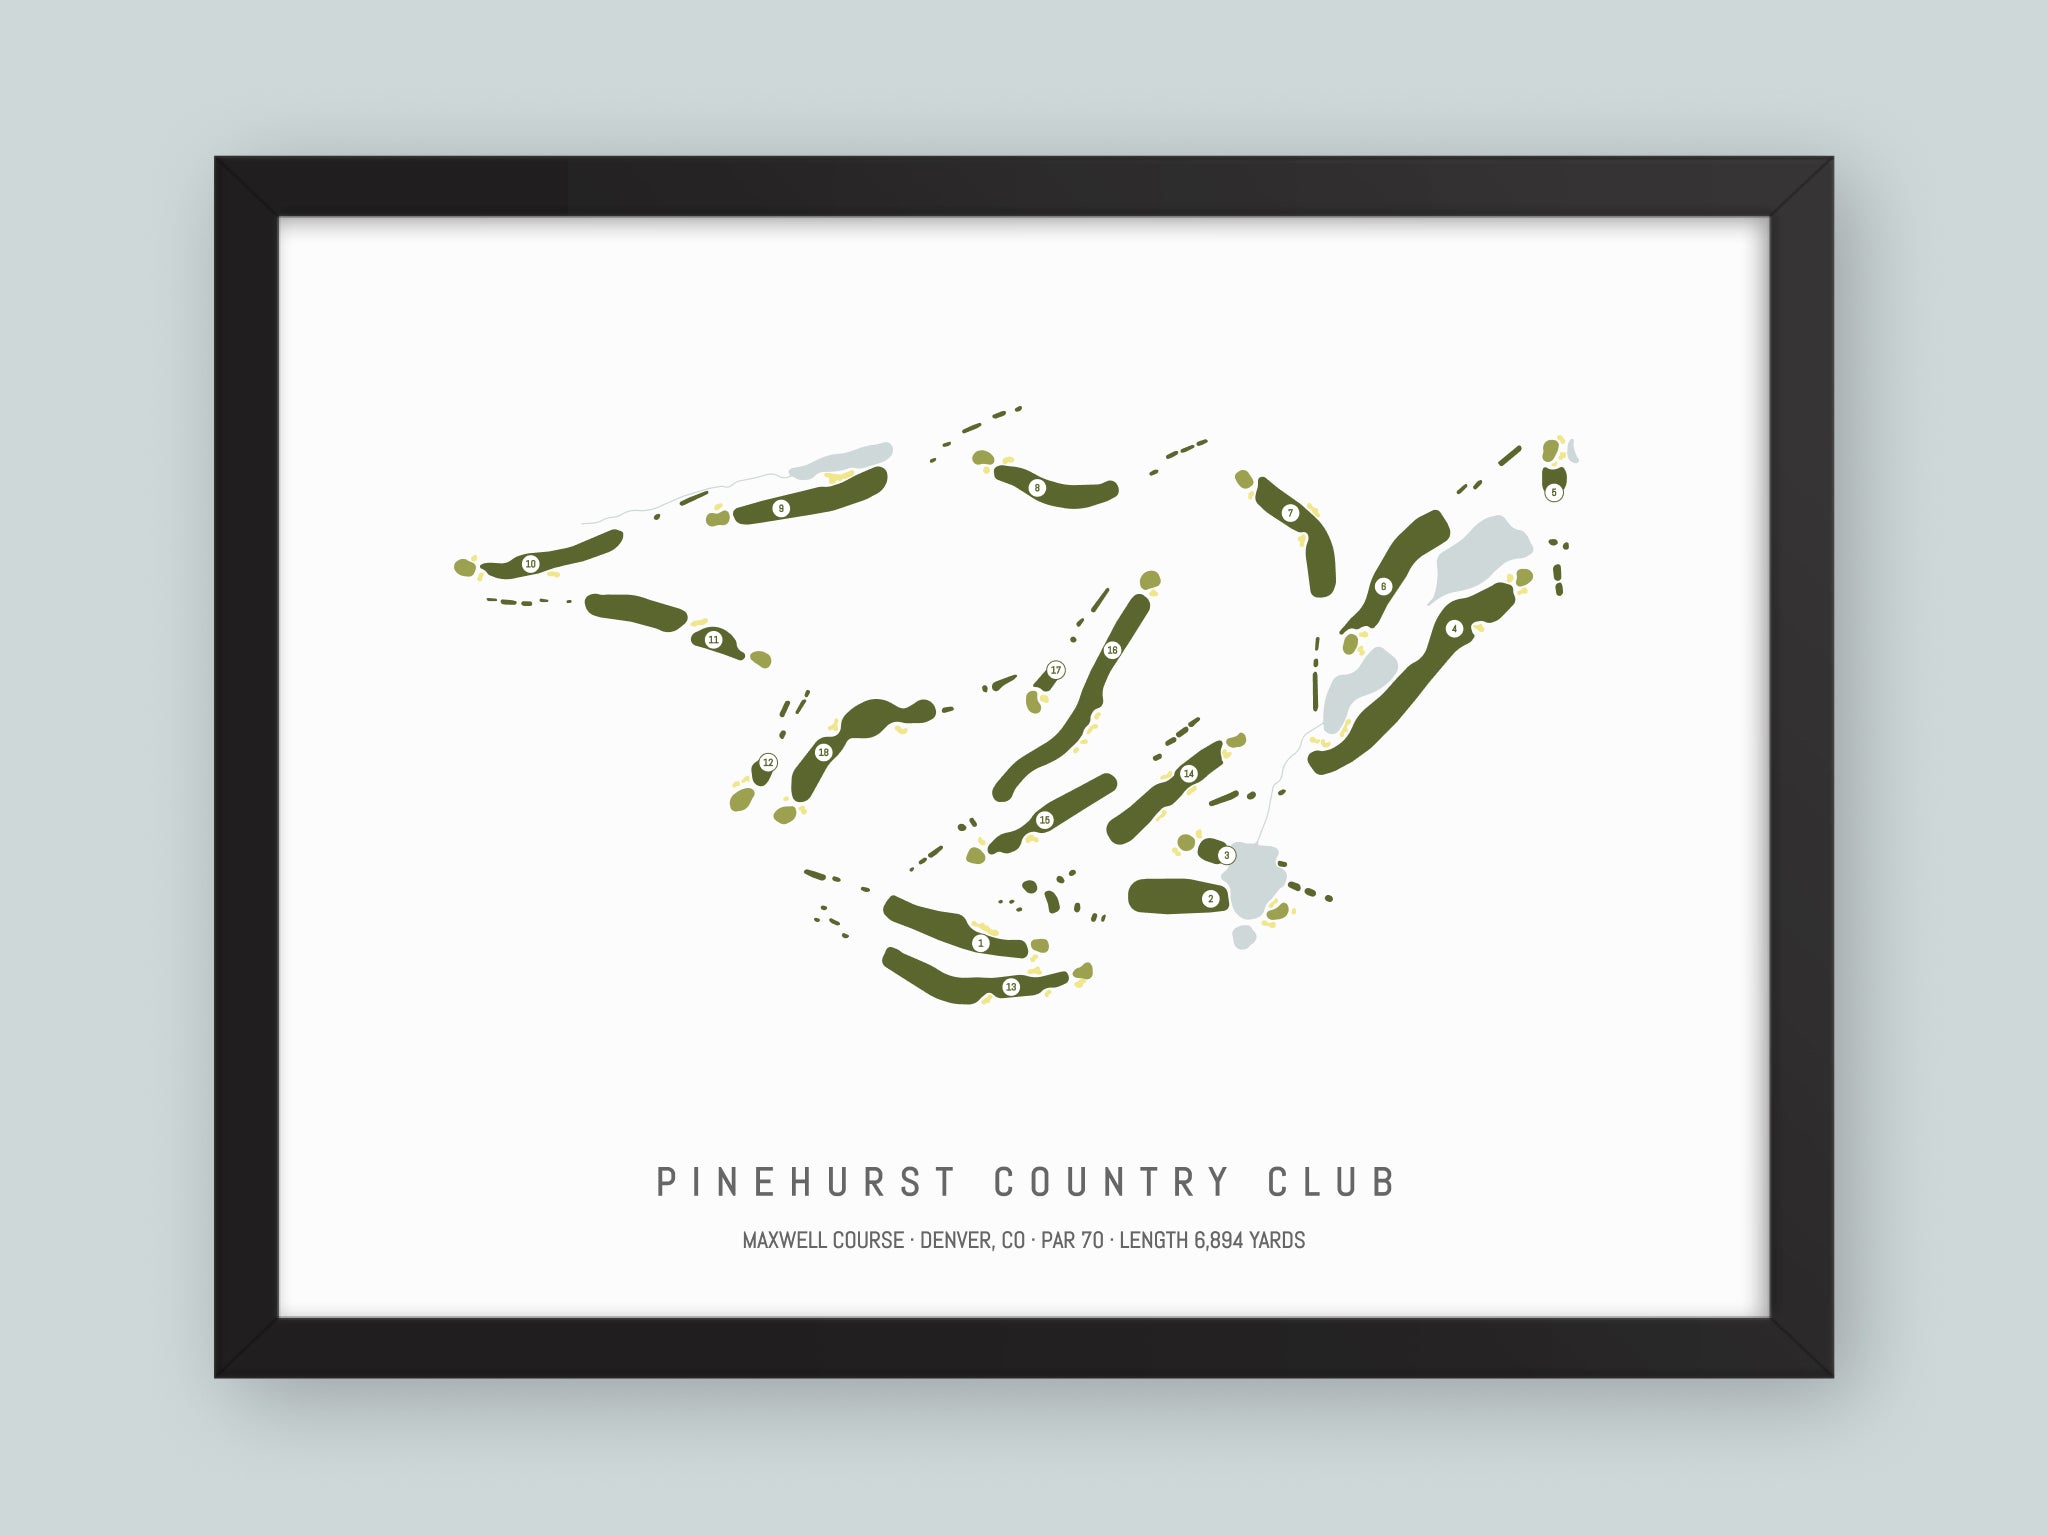 Pinehurst-Country-Club-Maxwell-Course-CO--Black-Frame-24x18-With-Hole-Numbers